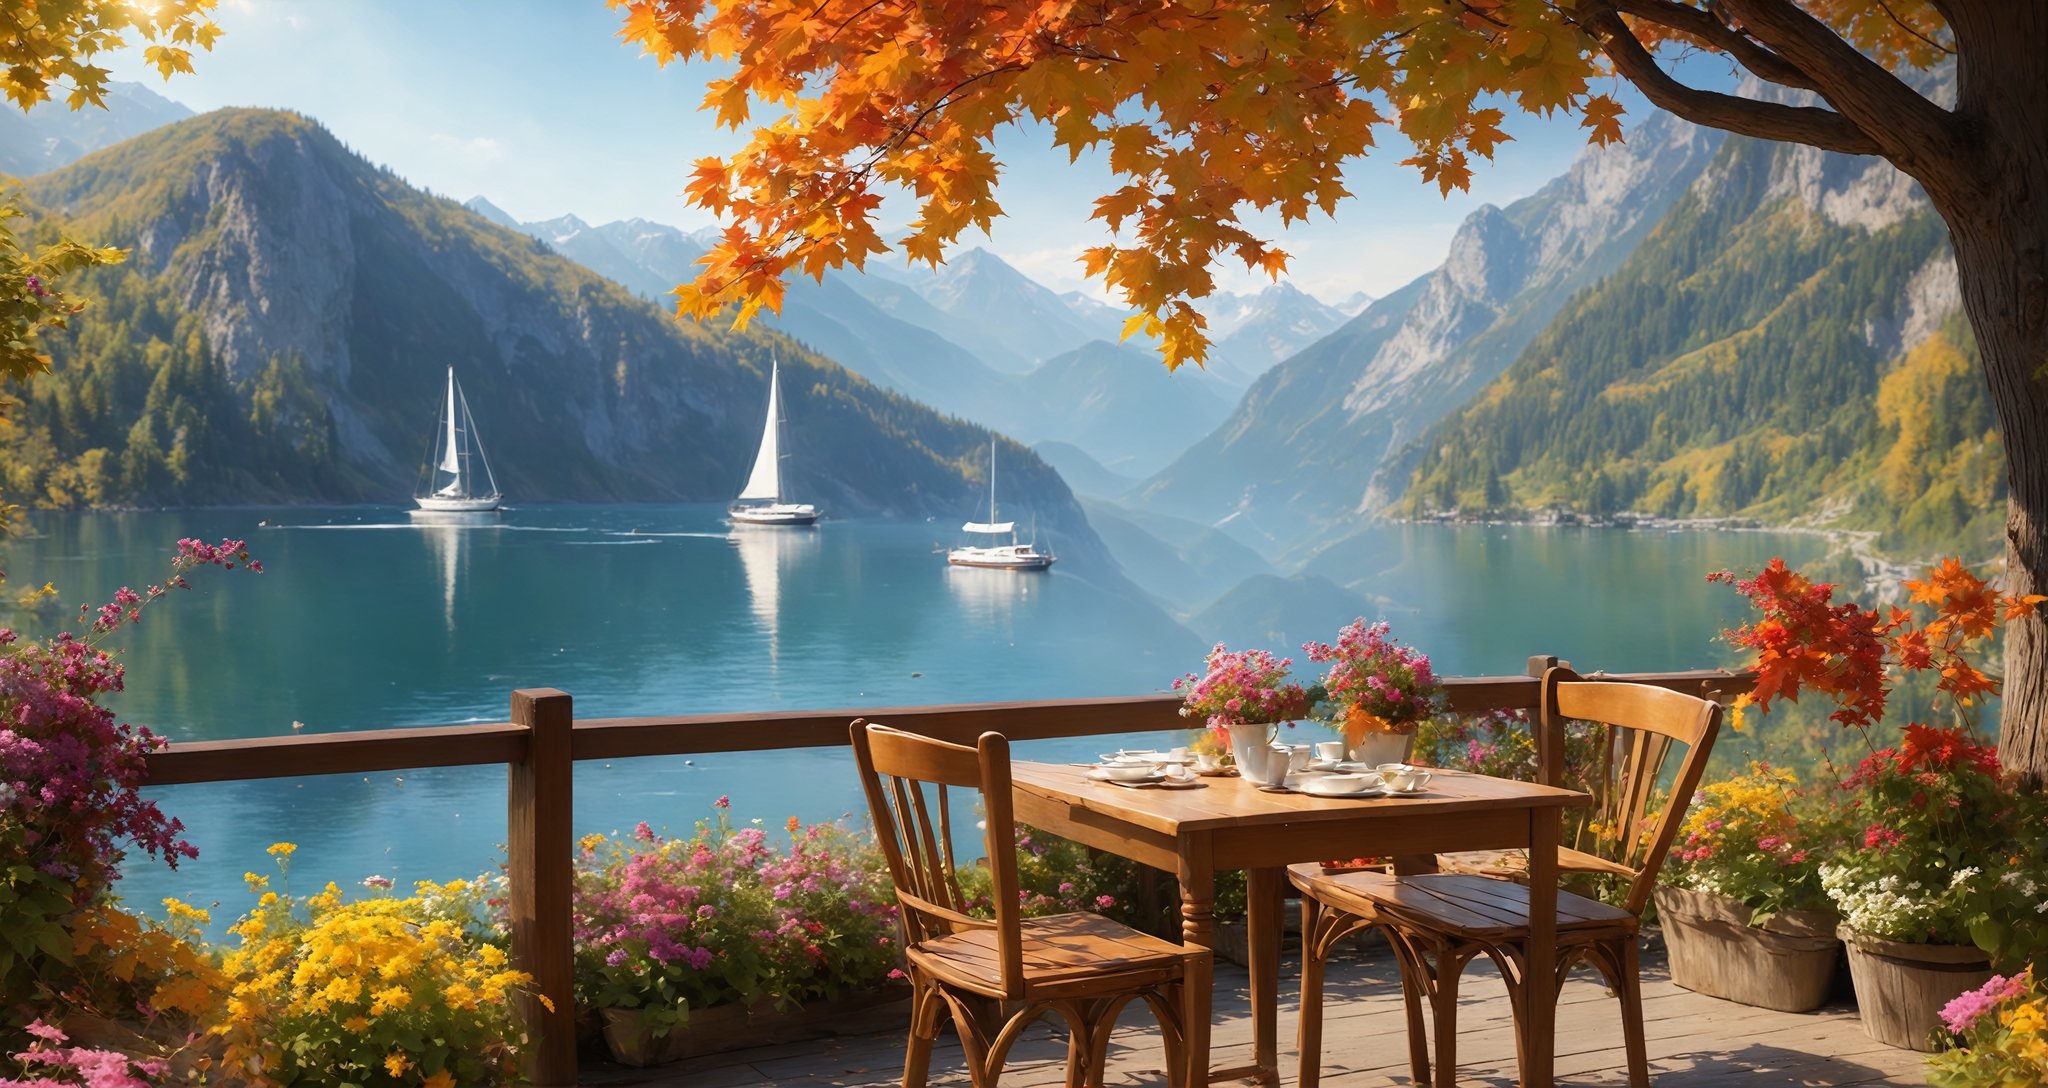 Autumn style, flowers and maple leaves in bloom, "beautiful outdoor cafe", wild flowers blooming on the shore, several beautiful small sailboats on the water, amazing scenery, mountain wild flowers blooming, full of magical places, looks like a fairyland story The world, like heaven, with flowers and sunlight bokeh in the background, depth of field, incredible beauty. The style is vivid.